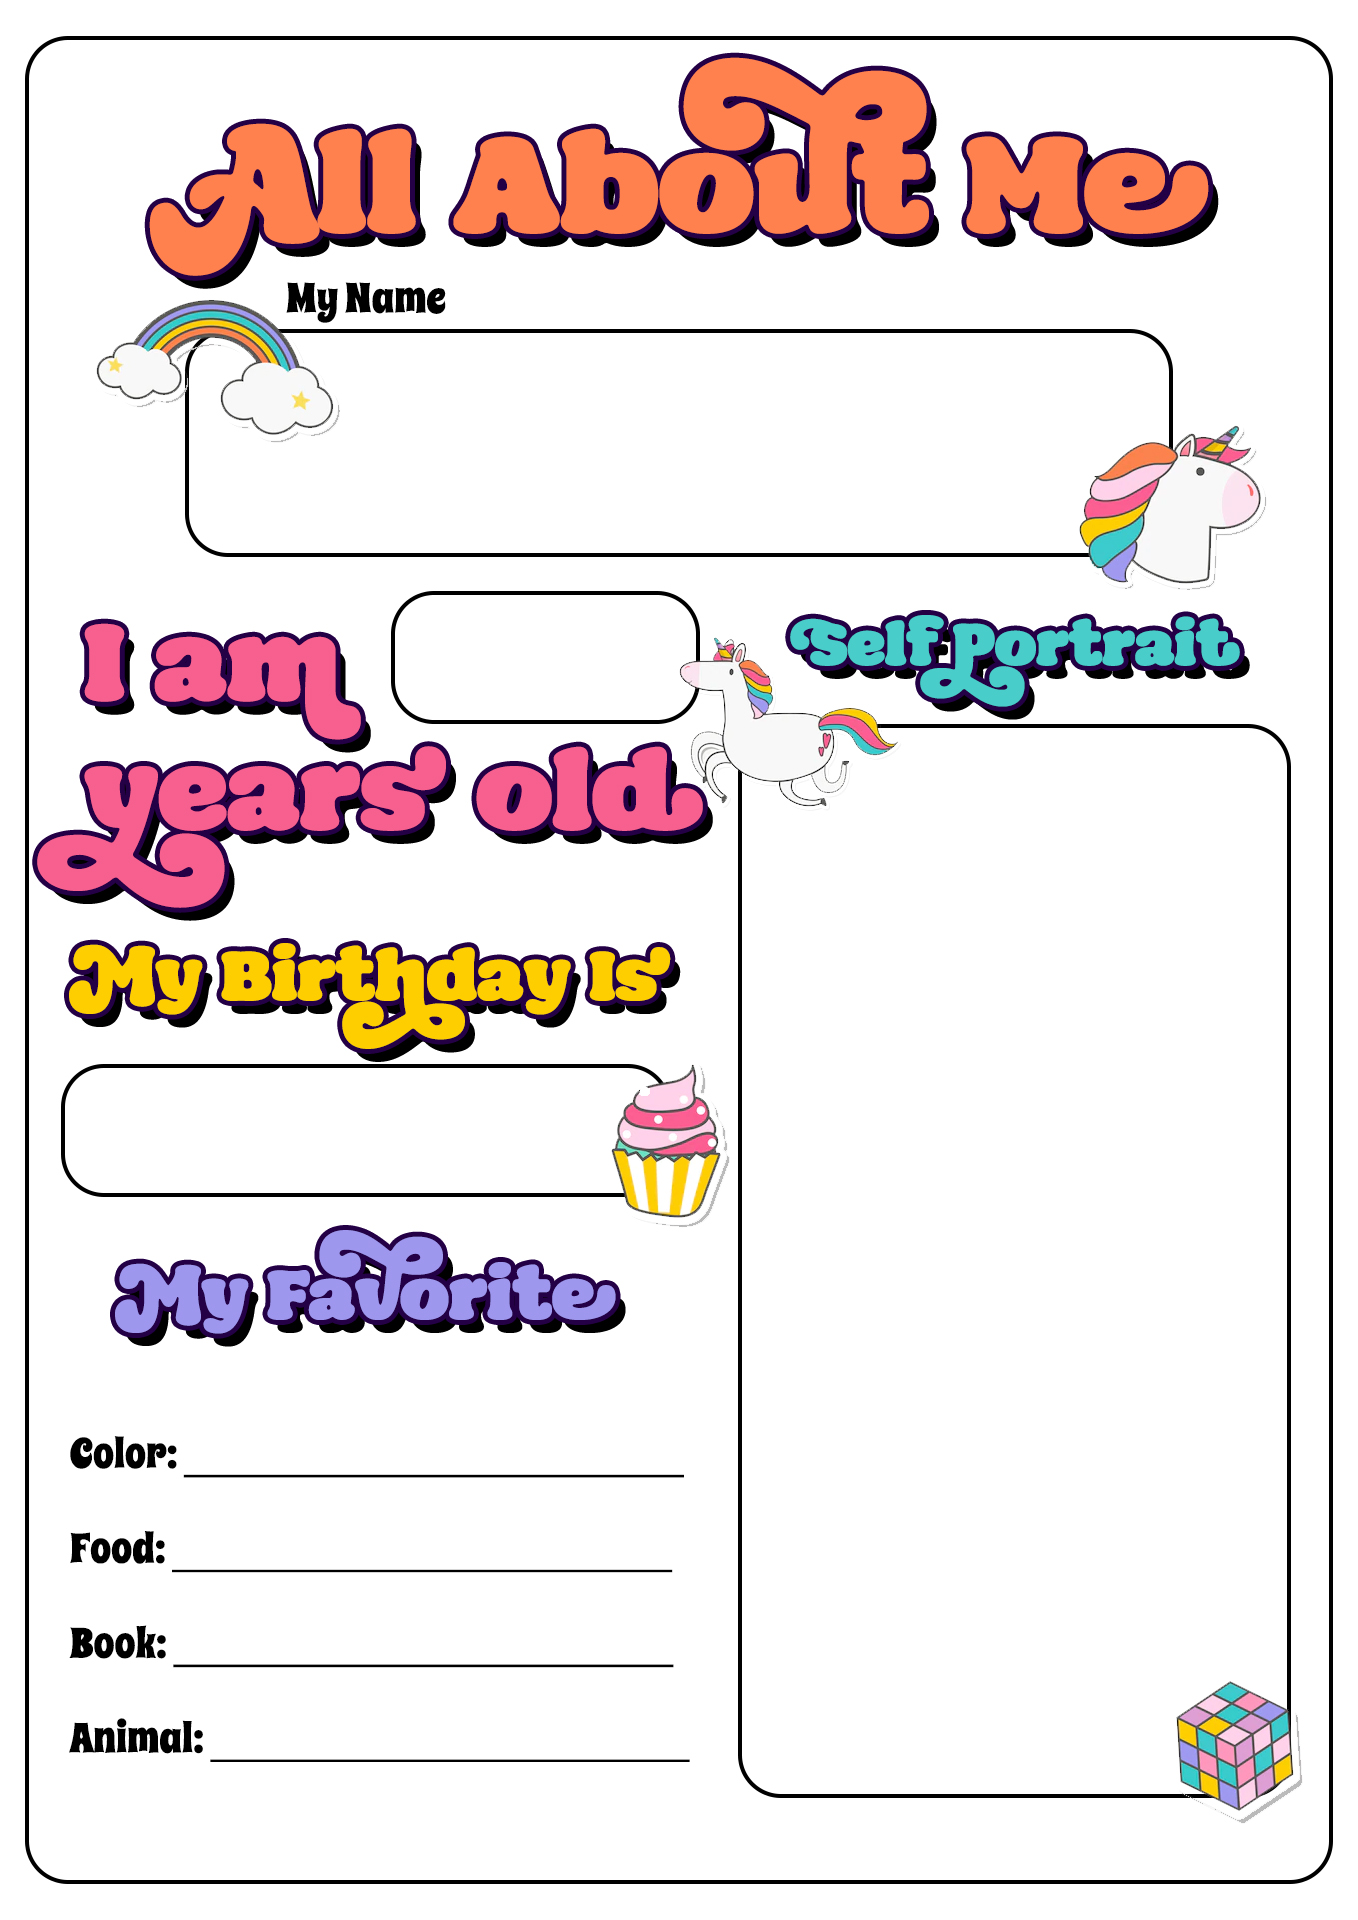 All About Me Pre-K Activities Image